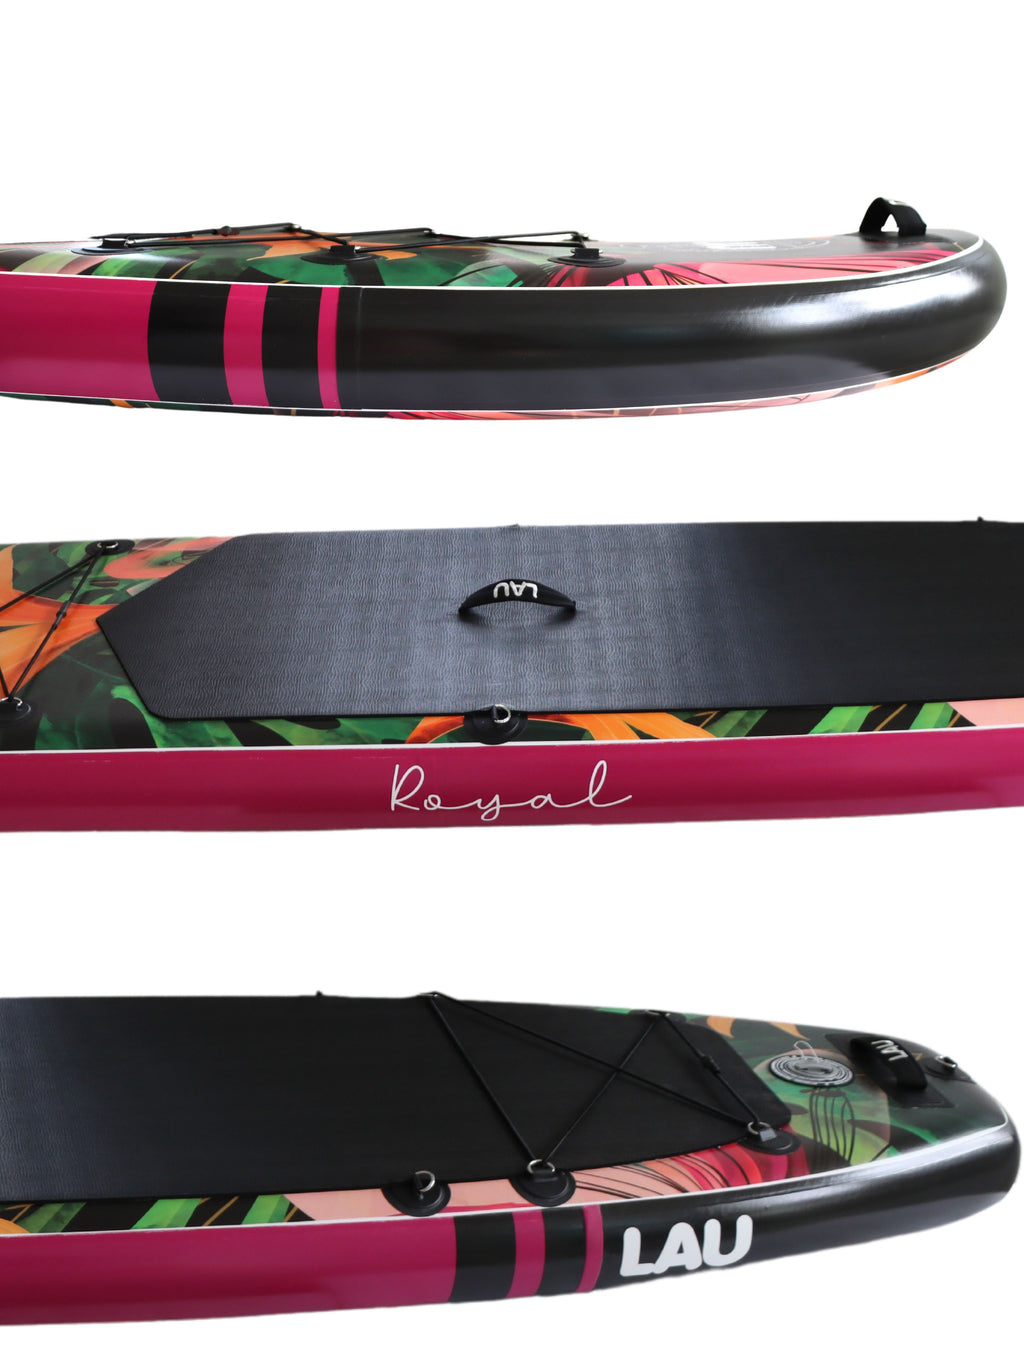 Royal- 10'6 All-around- Paddle board gonflable